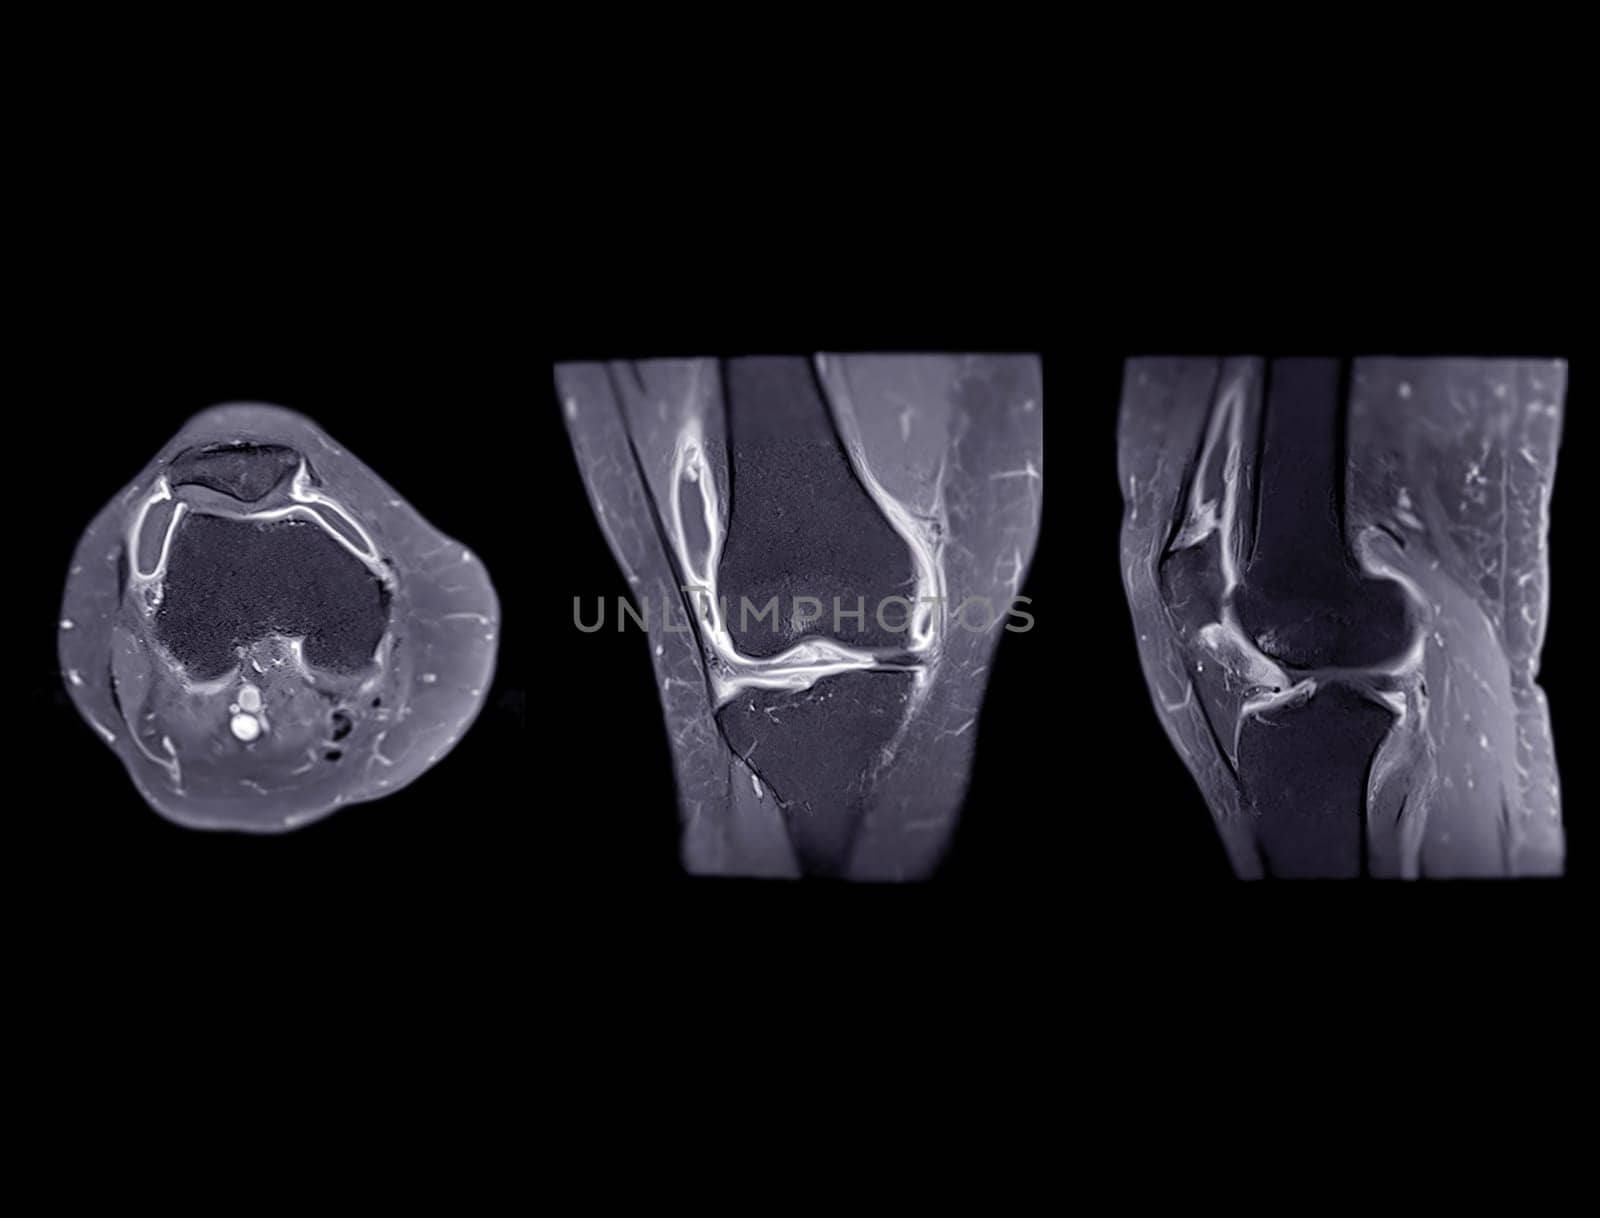 Magnetic resonance imaging or MRI of  knee joint Axial ,Coronal and sagittal T2 FS for detect tear or sprain of the anterior cruciate  ligament (ACL)